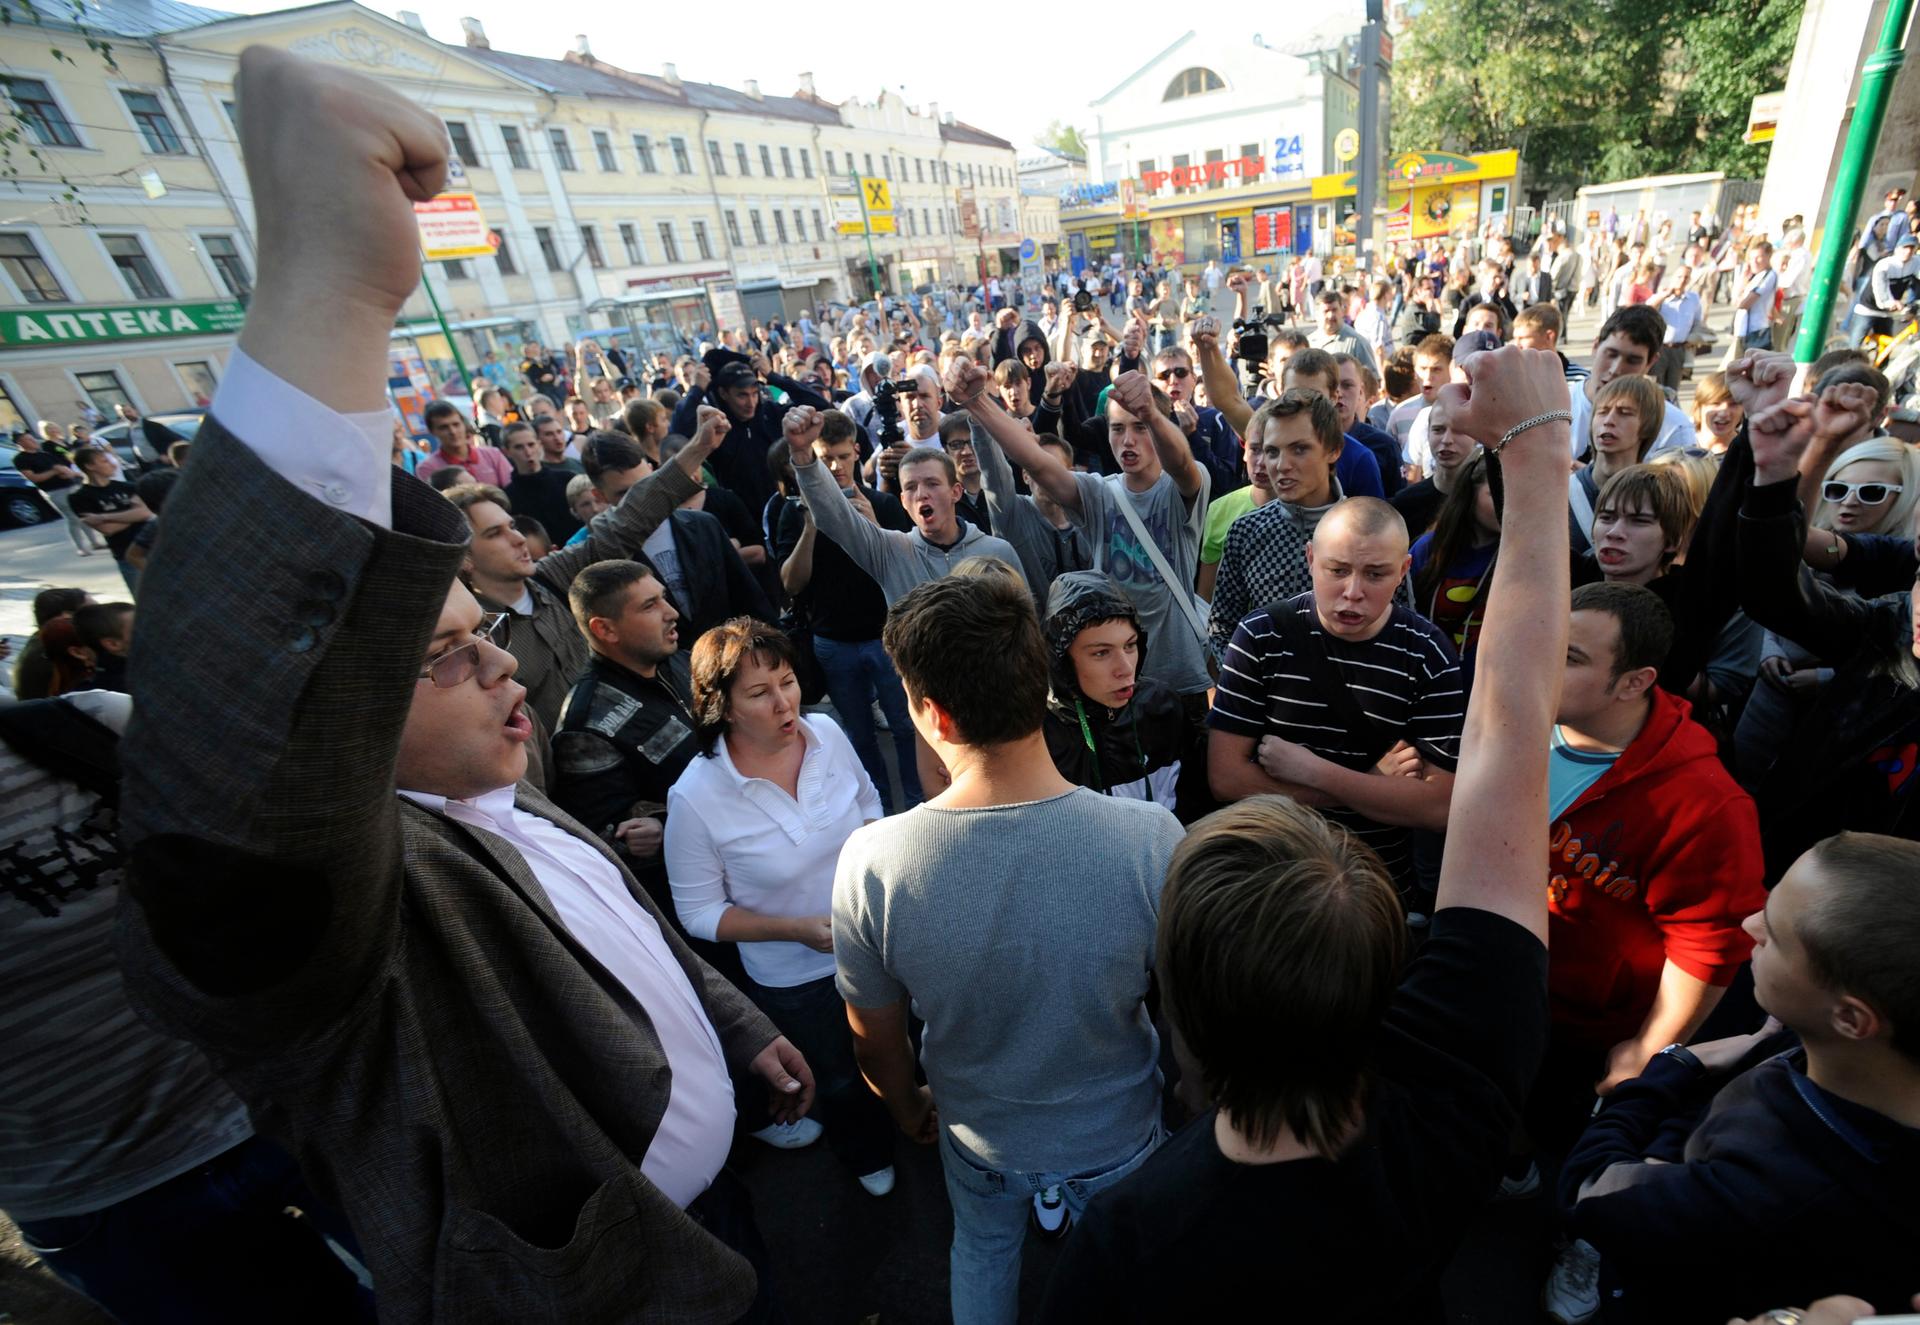 Demonstrators shout slogans during a protest against Dagestani-born martial arts champion Rasul Mirzayev in central Moscow August 25, 2011. Mirzayev has been detained and accused of killing a Muscovite during a street fight.